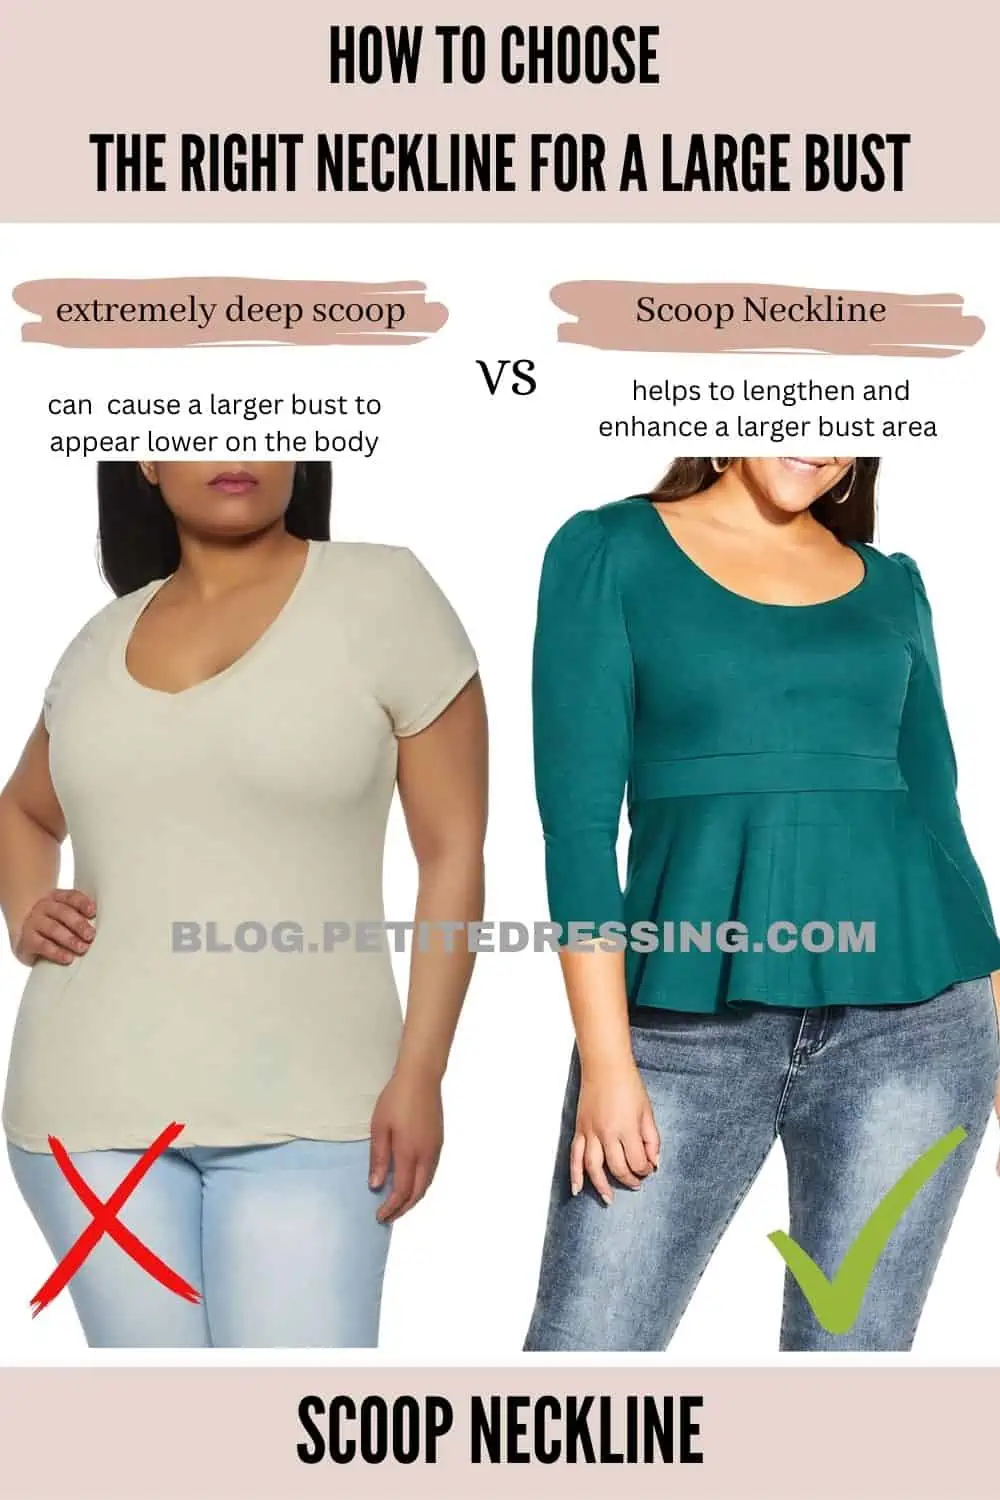 How to Choose the Right Neckline for a Large Bust - Petite Dressing